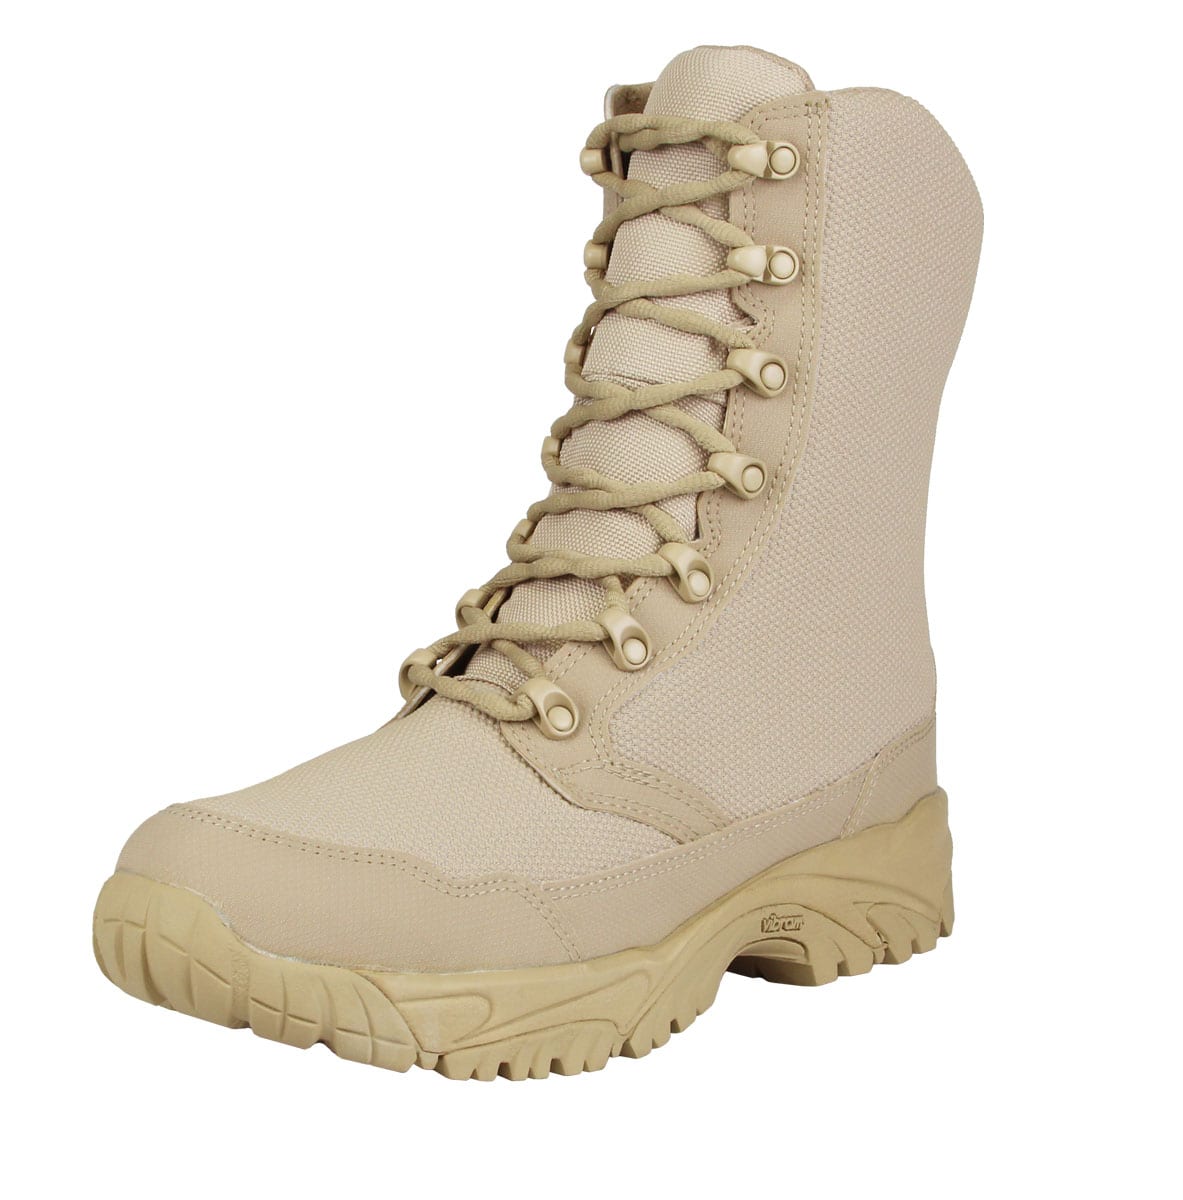 waterproof military boots